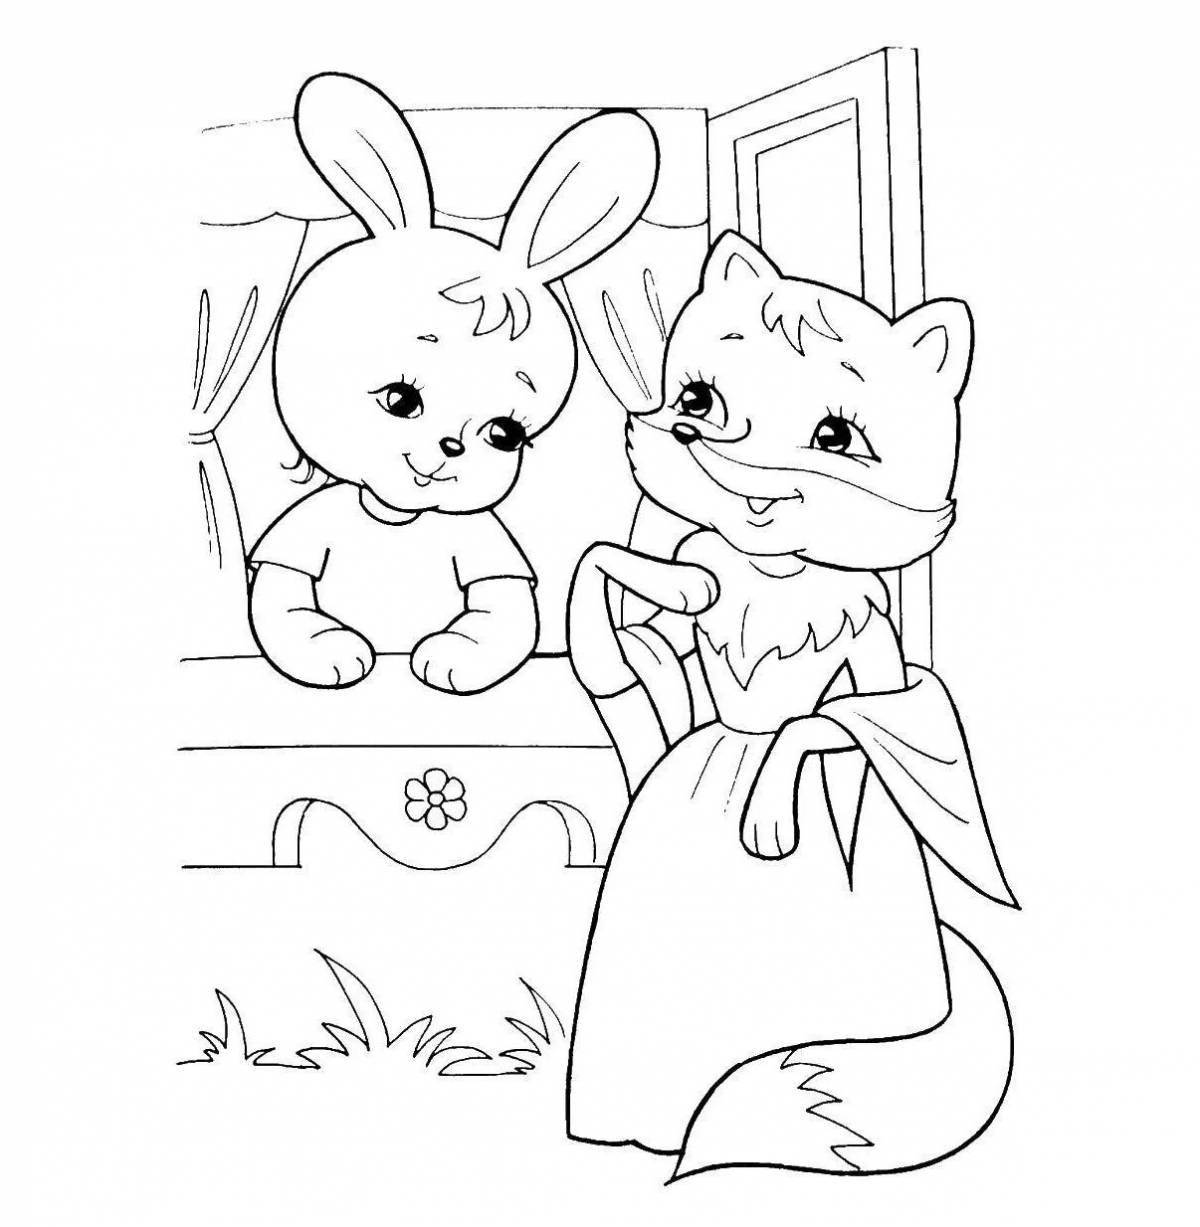 Coloring page nice hare hut